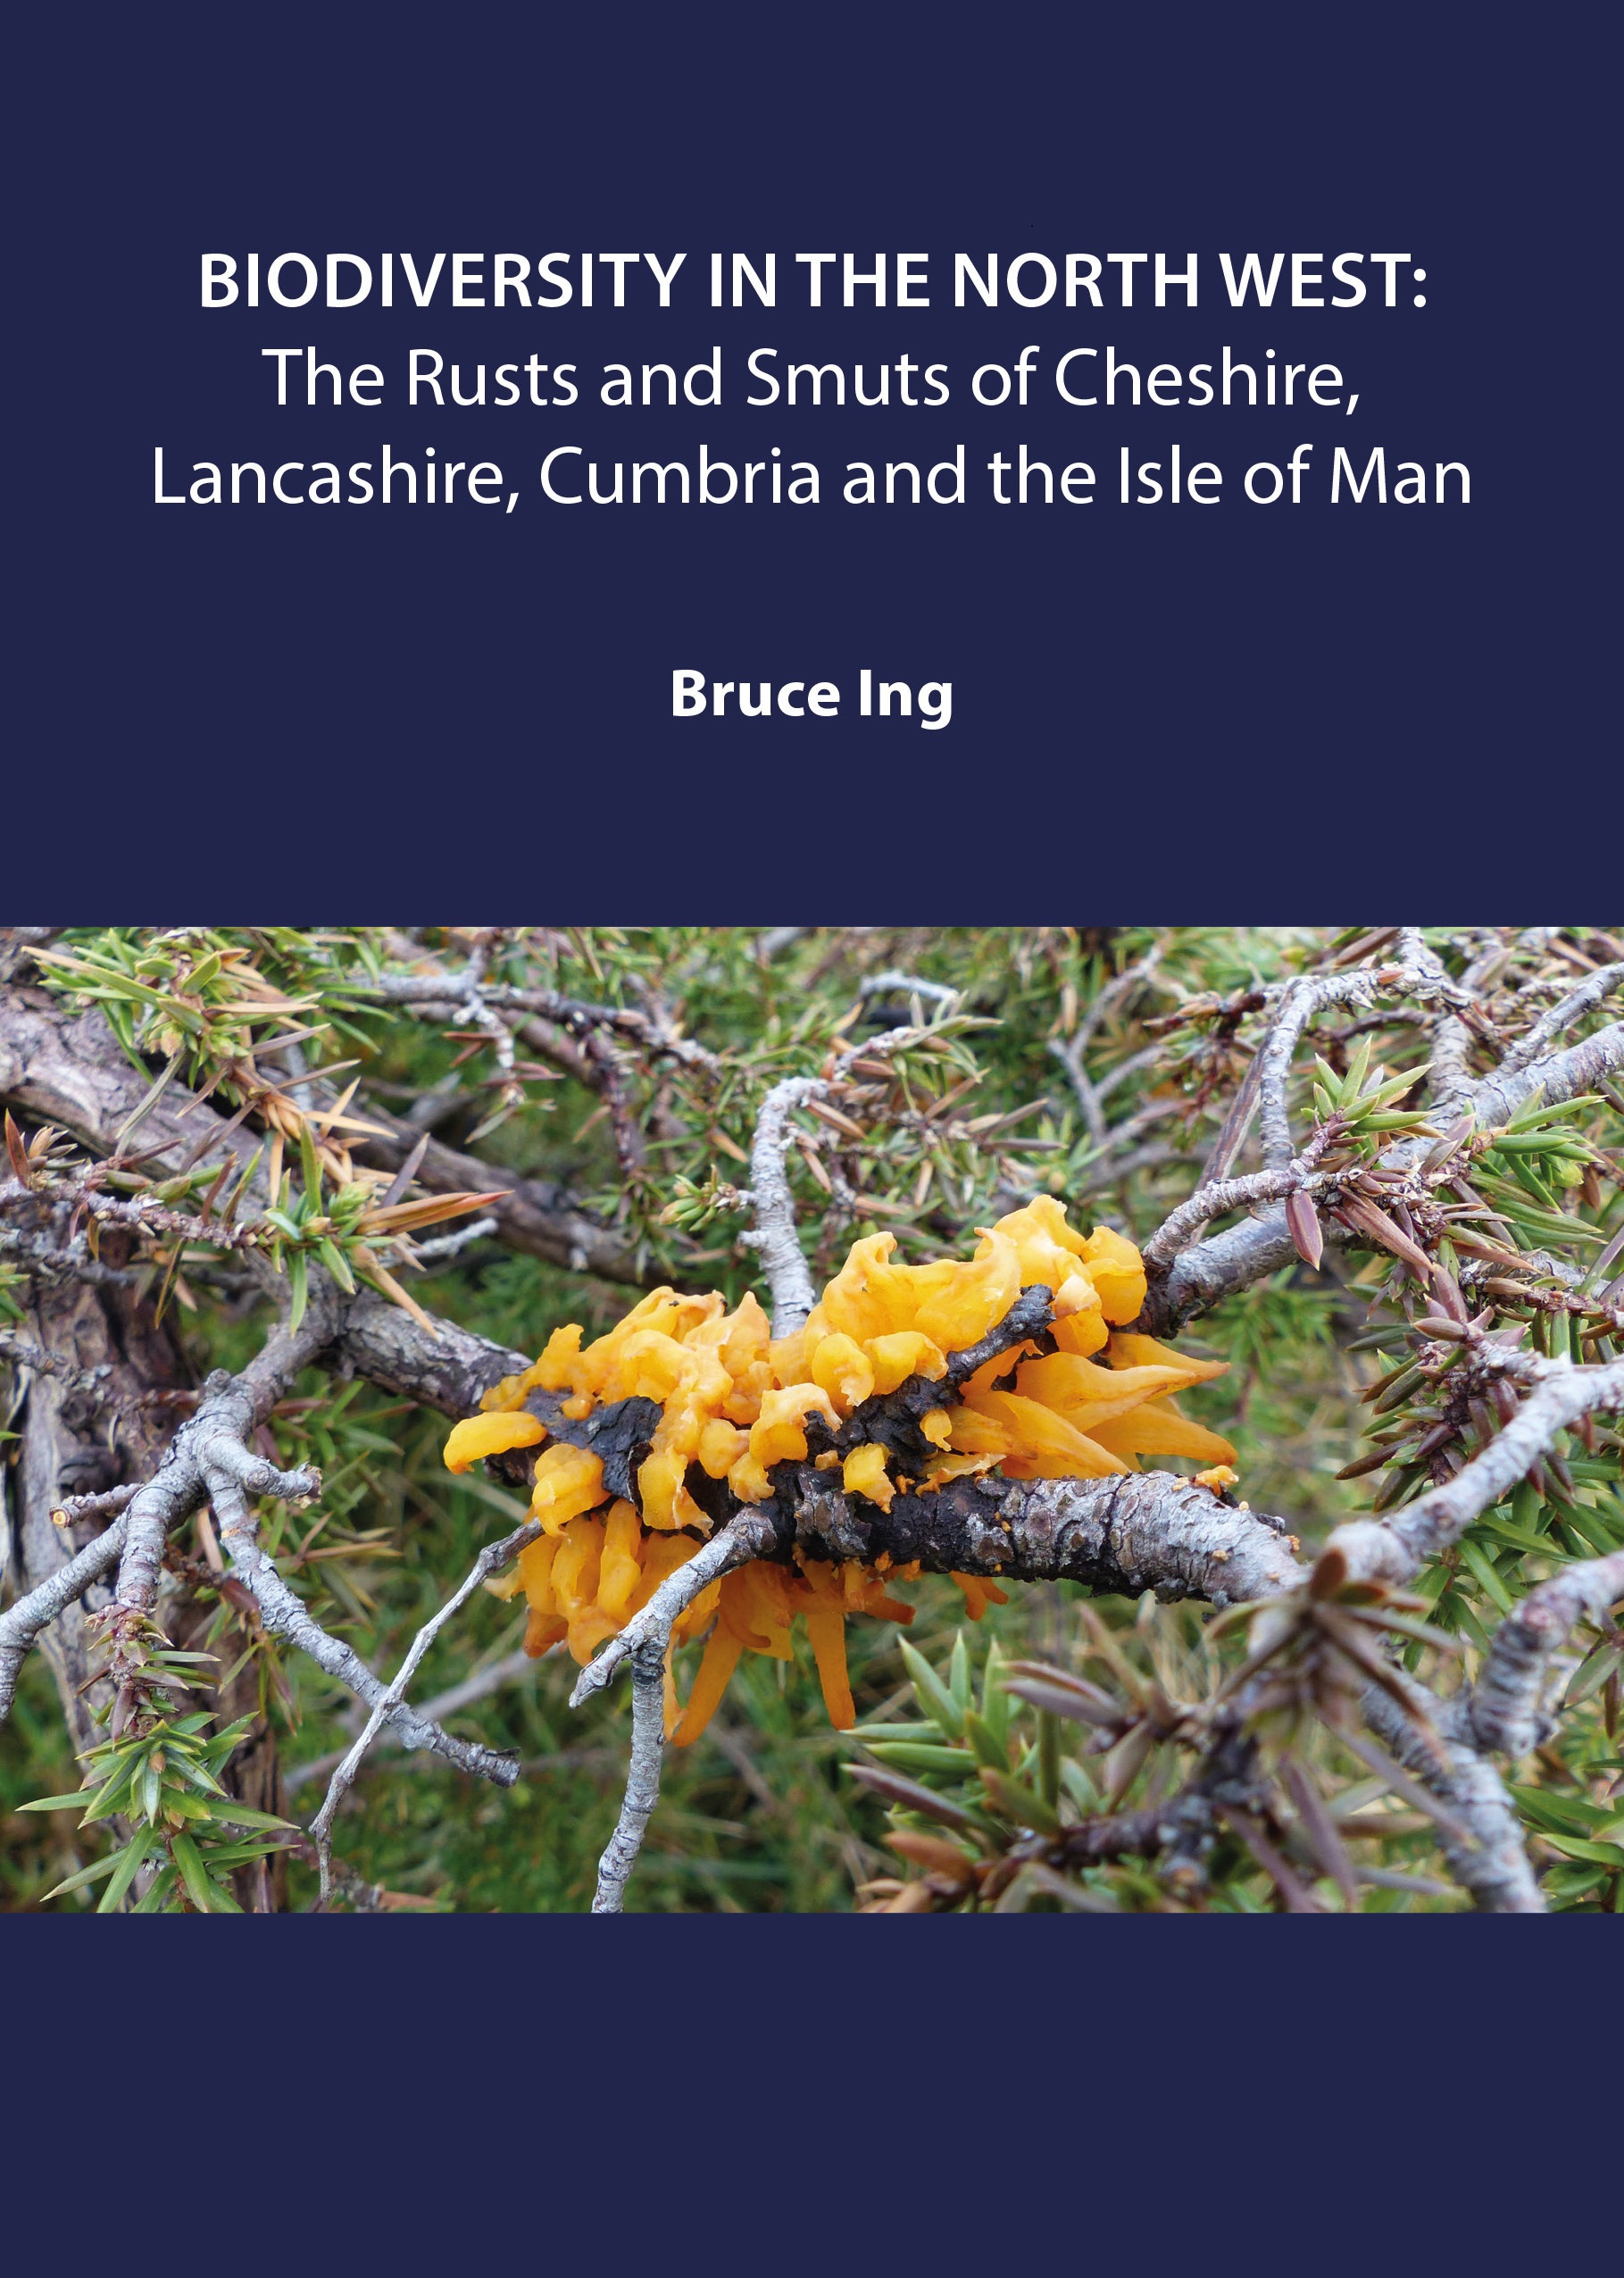 Biodiversity in the North West: The Rusts and Smuts of Cheshire, Lancashire, Cumbria and the Isle of Man